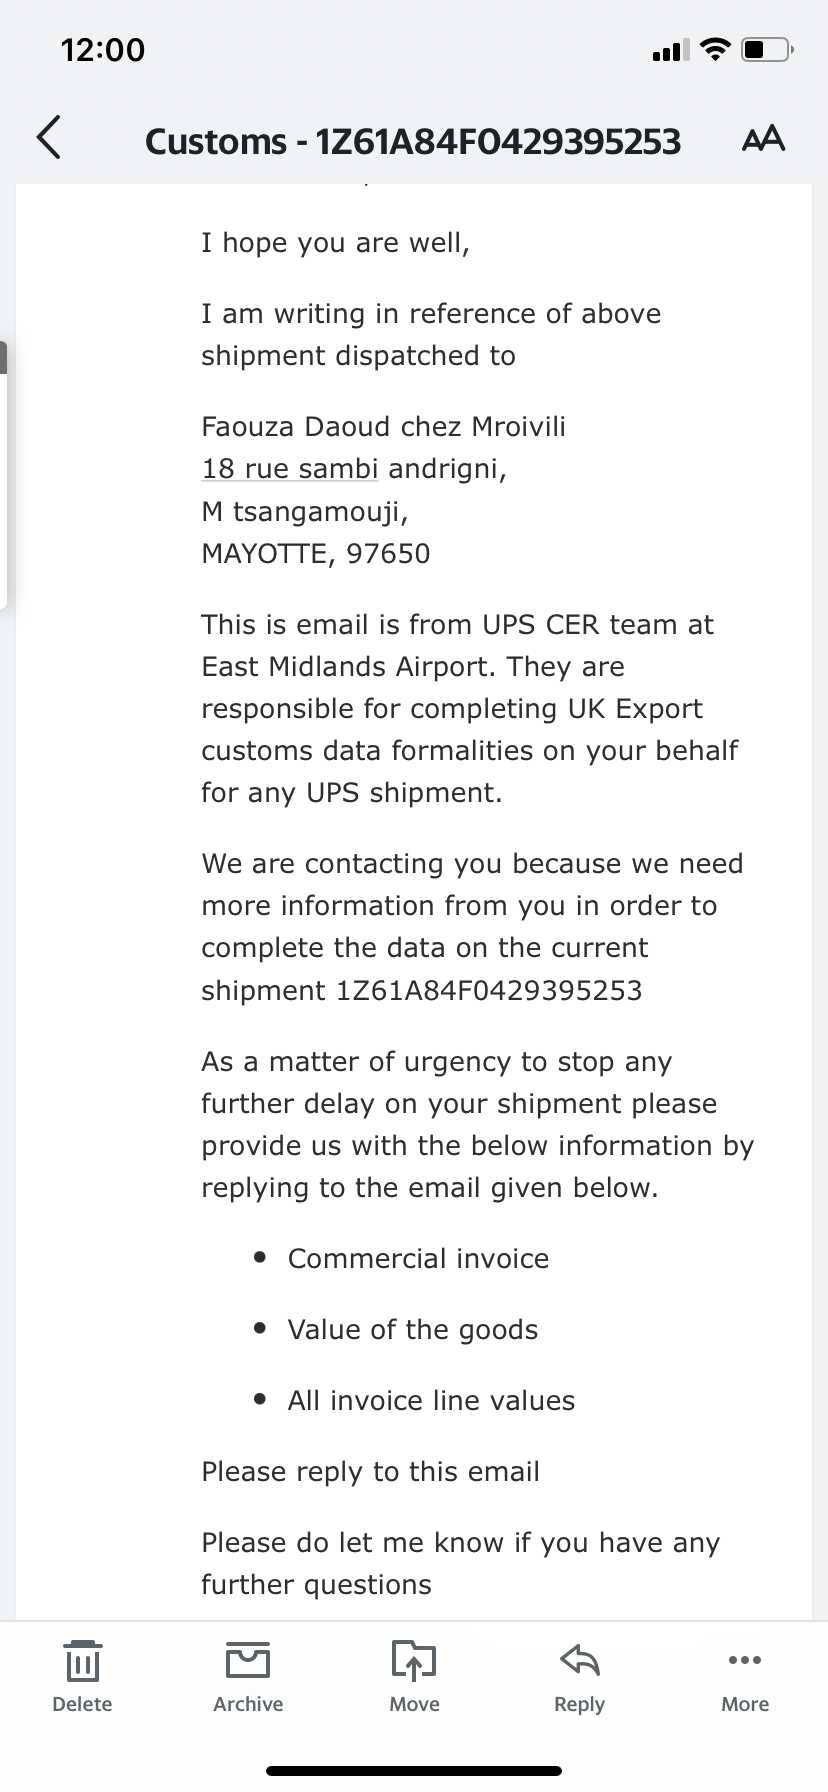 ParcelCompare complaint My parcel lost and they refused to refund me